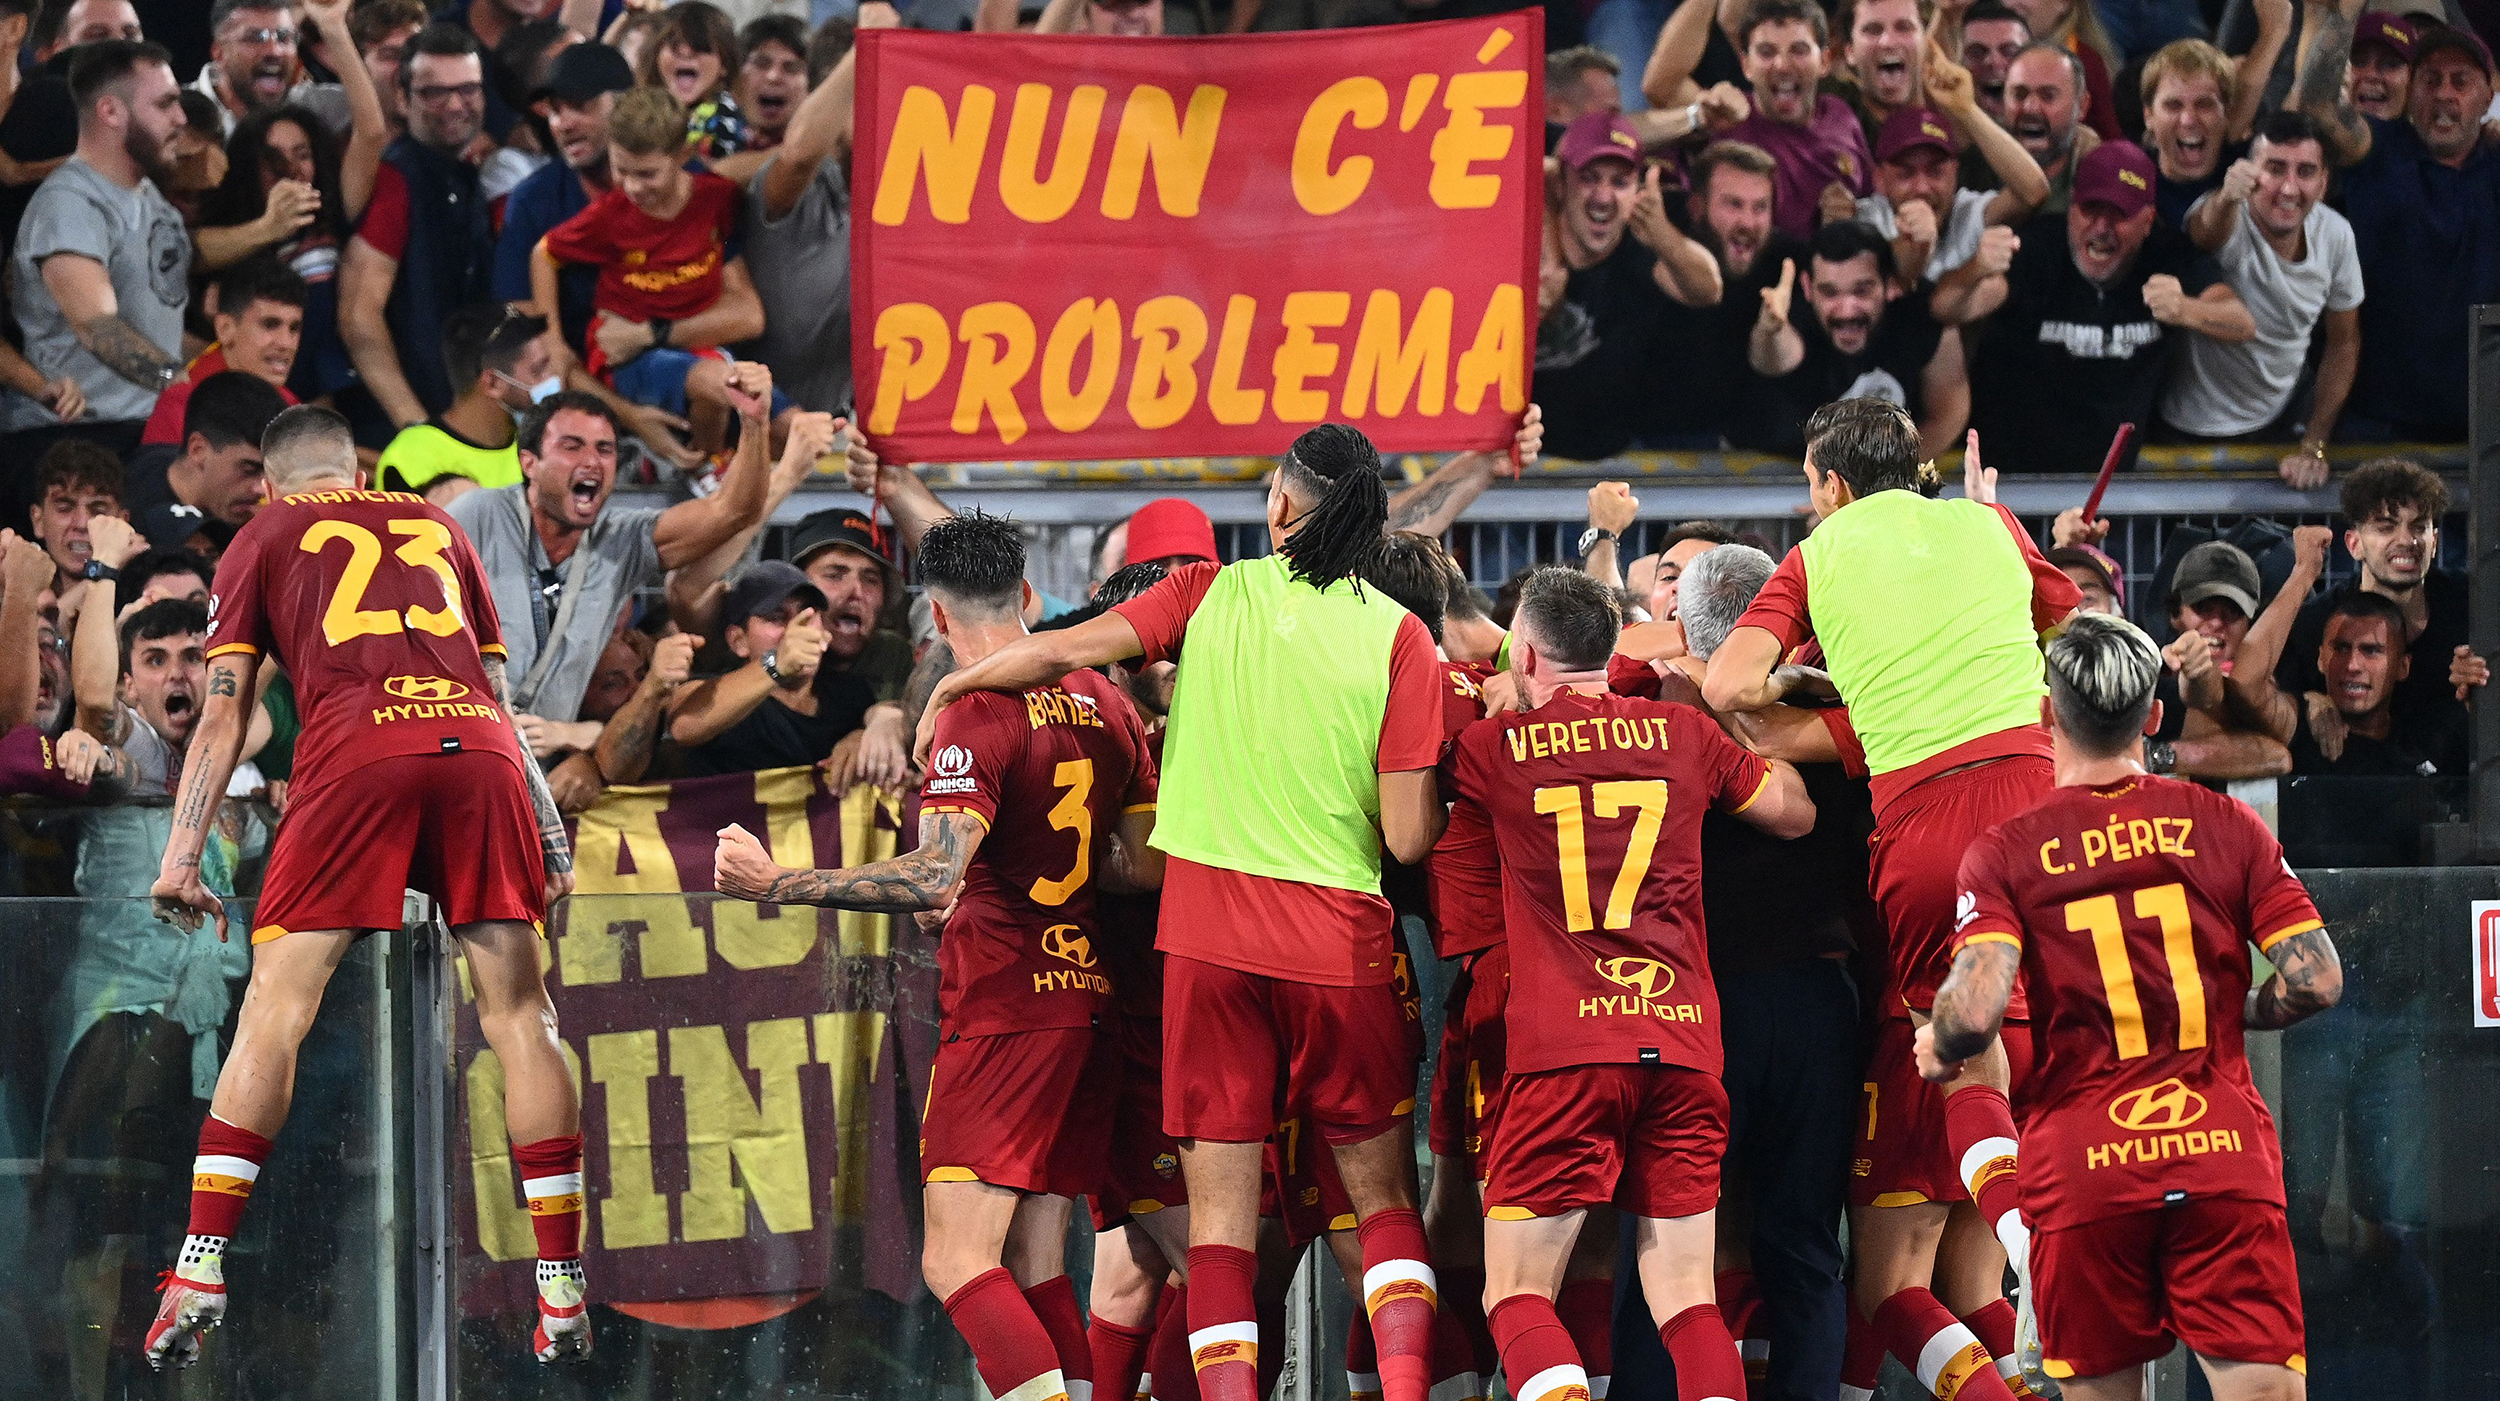 Roma's players celebrate after scoring during the Italian Serie A football match between AS Roma and Sassuolo at the Olympic stadium in Rome on September 12, 2021.